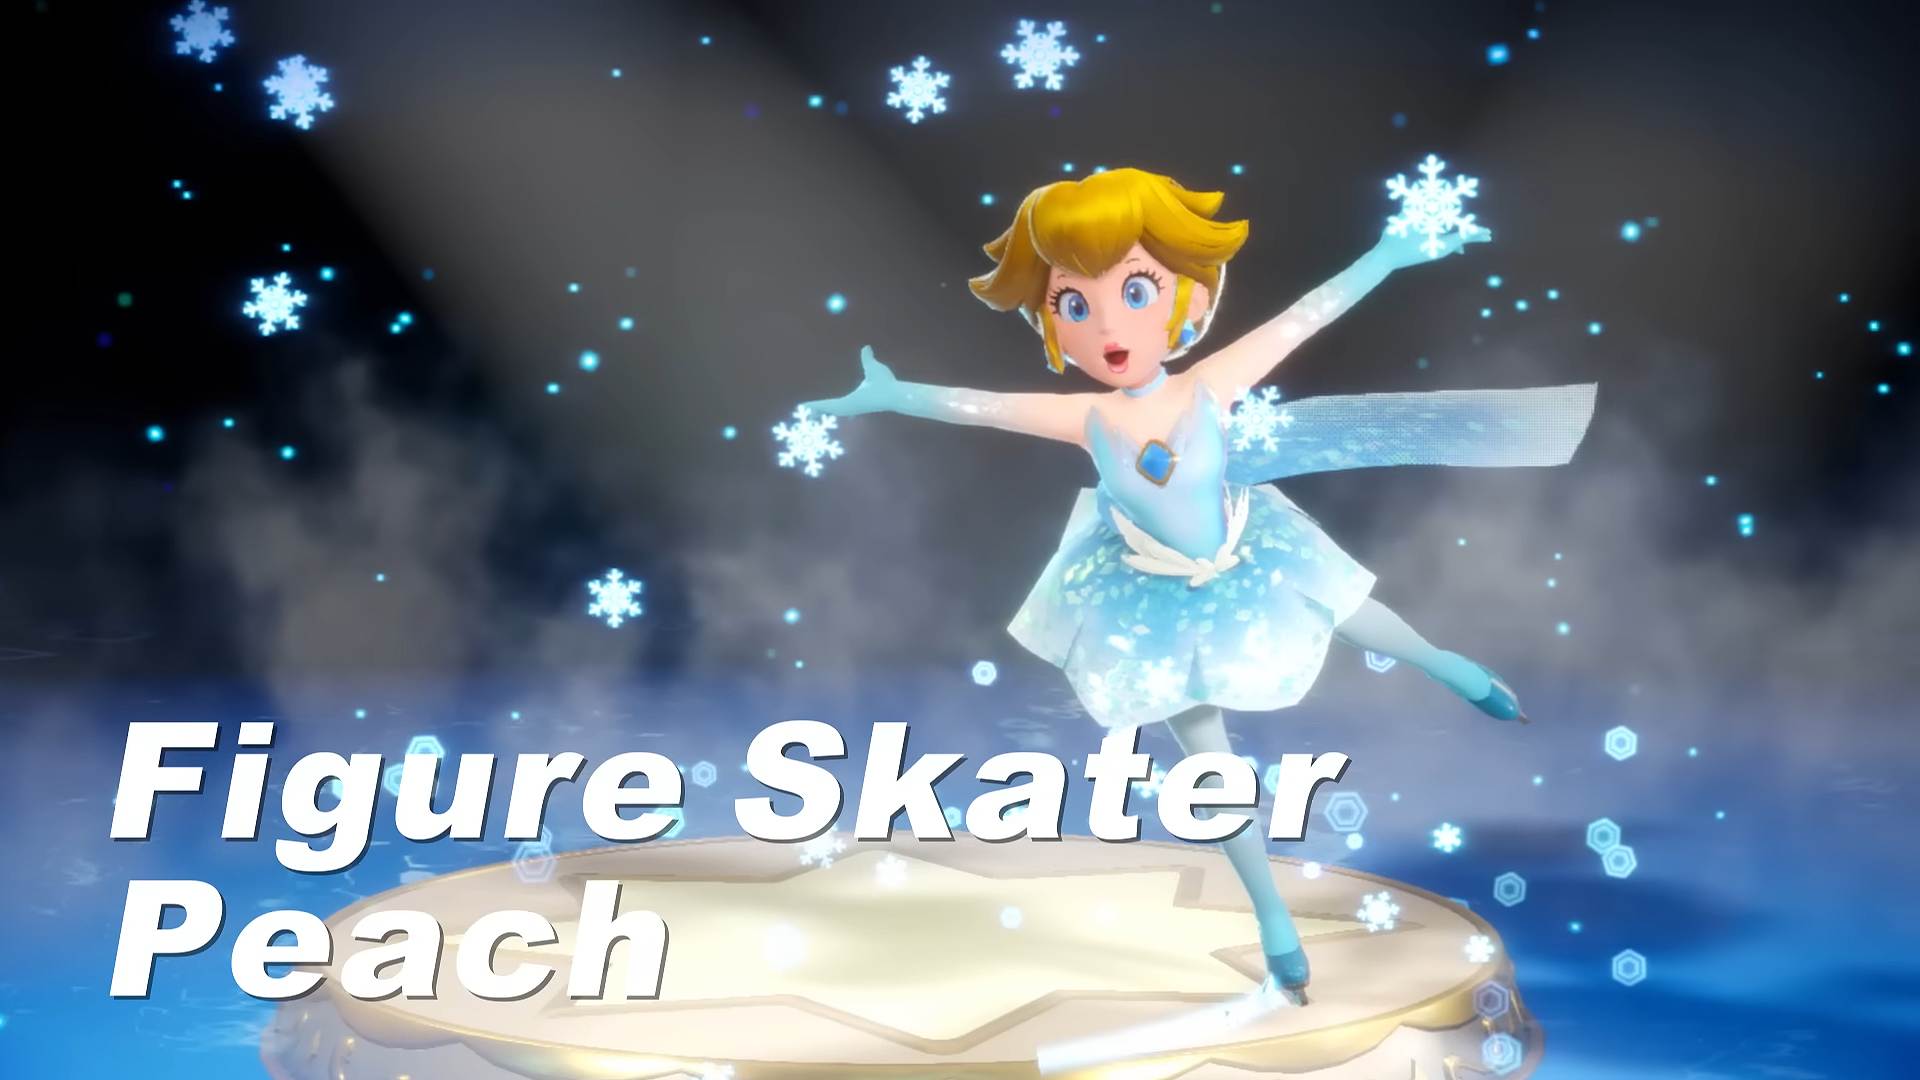 Figure Skater Peach outfit